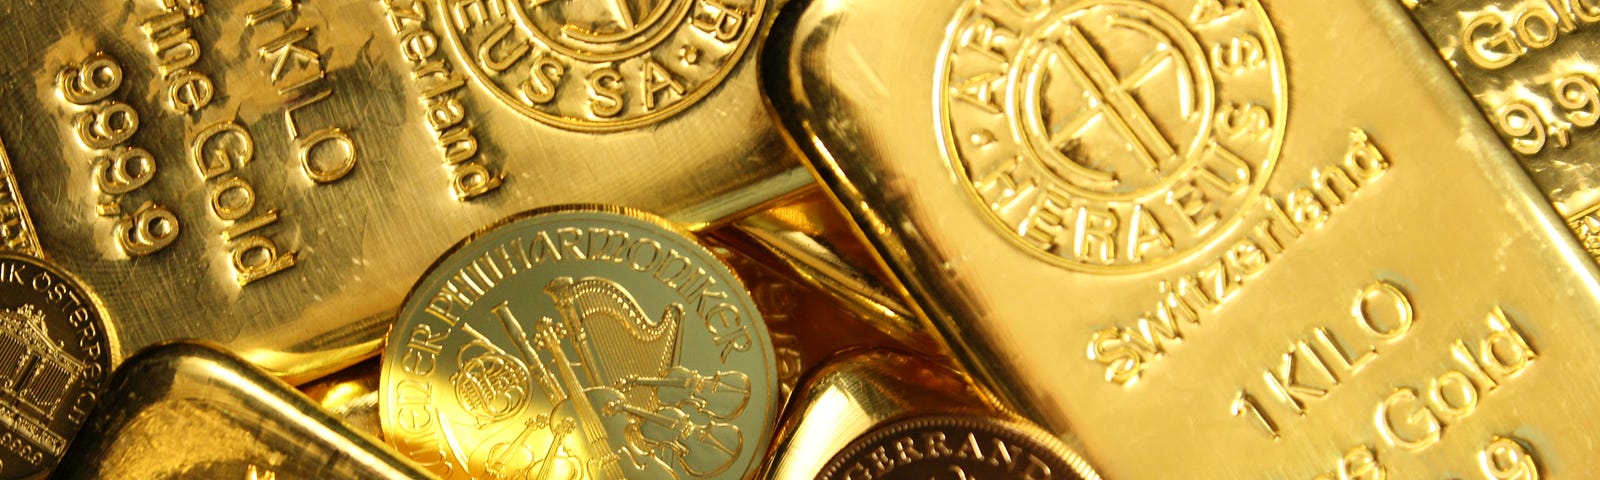 A collection of vintage gold coins and gold bullion.